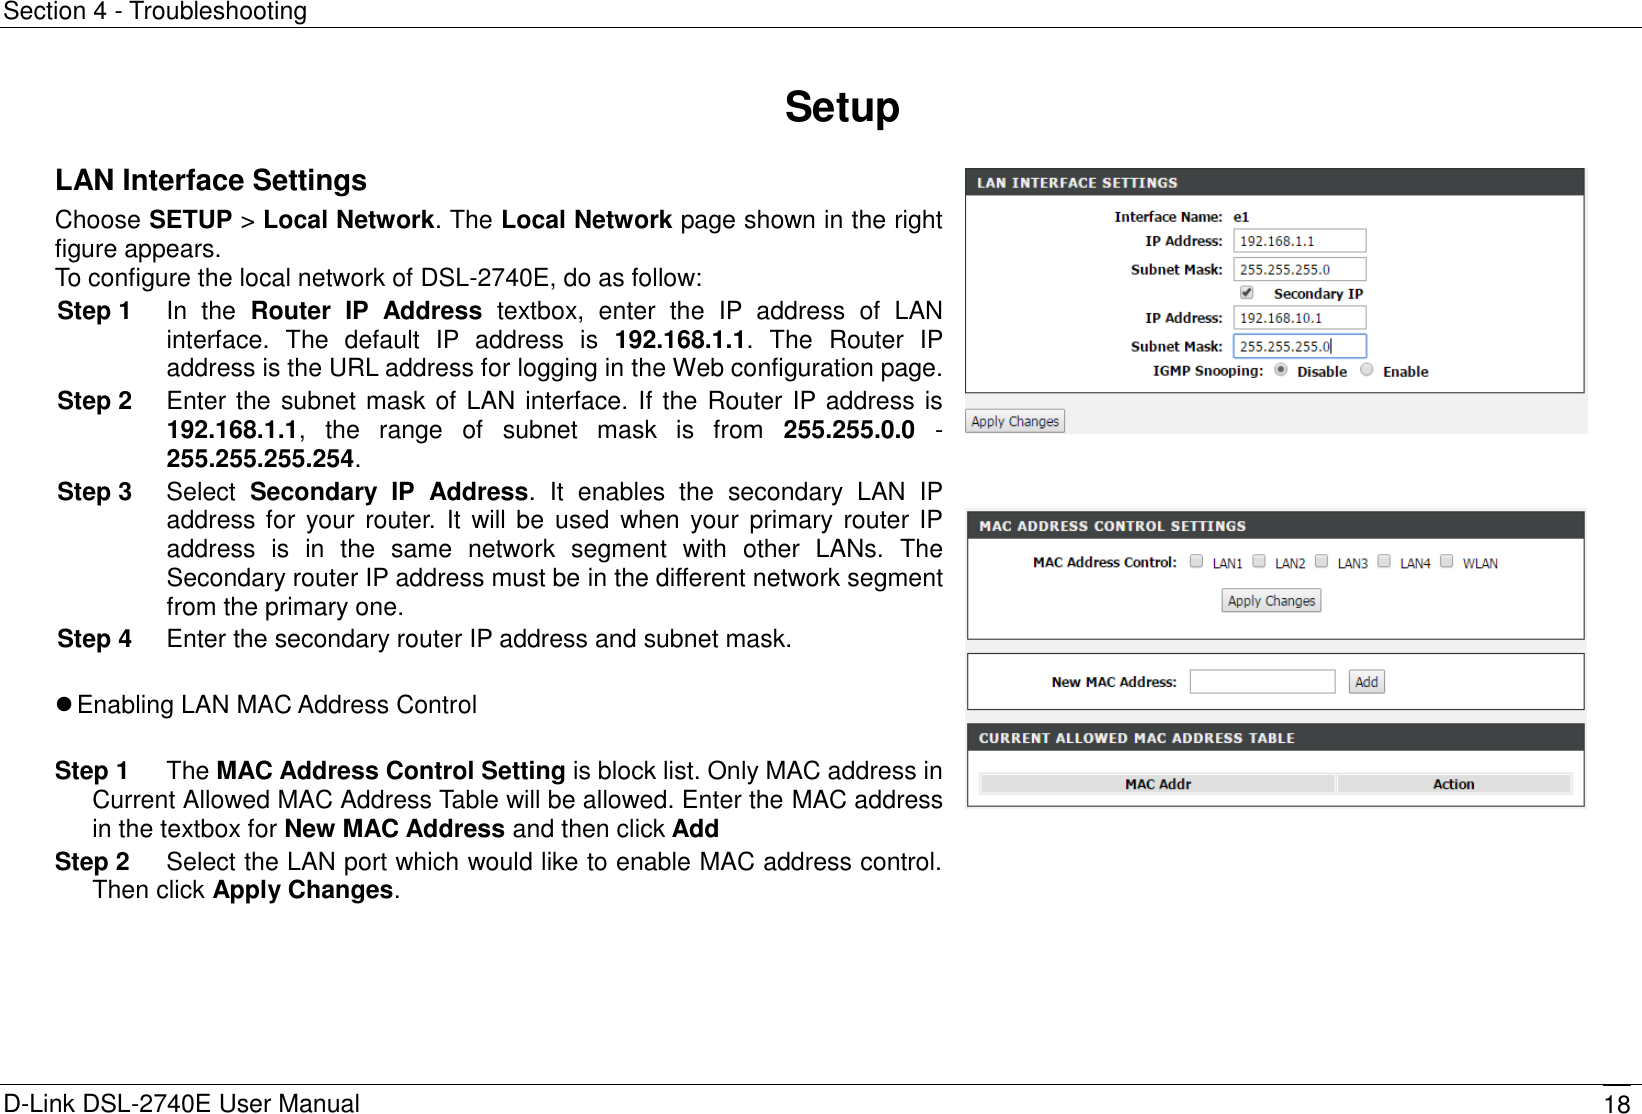 Section 4 - Troubleshooting D-Link DSL-2740E User Manual 18 Setup LAN Interface Settings Choose SETUP &gt; Local Network. The Local Network page shown in the right figure appears. To configure the local network of DSL-2740E, do as follow: Step 1  In  the  Router  IP  Address  textbox,  enter  the  IP  address  of  LAN interface.  The  default  IP  address  is  192.168.1.1.  The  Router  IP address is the URL address for logging in the Web configuration page. Step 2  Enter the subnet mask of LAN interface. If the Router IP address is 192.168.1.1,  the  range  of  subnet  mask  is  from  255.255.0.0  - 255.255.255.254. Step 3  Select  Secondary  IP  Address.  It  enables  the  secondary  LAN  IP address for your router.  It  will be used when your  primary router IP address  is  in  the  same  network  segment  with  other  LANs.  The Secondary router IP address must be in the different network segment from the primary one. Step 4  Enter the secondary router IP address and subnet mask.   Enabling LAN MAC Address Control  Step 1  The MAC Address Control Setting is block list. Only MAC address in Current Allowed MAC Address Table will be allowed. Enter the MAC address in the textbox for New MAC Address and then click Add Step 2  Select the LAN port which would like to enable MAC address control. Then click Apply Changes.       